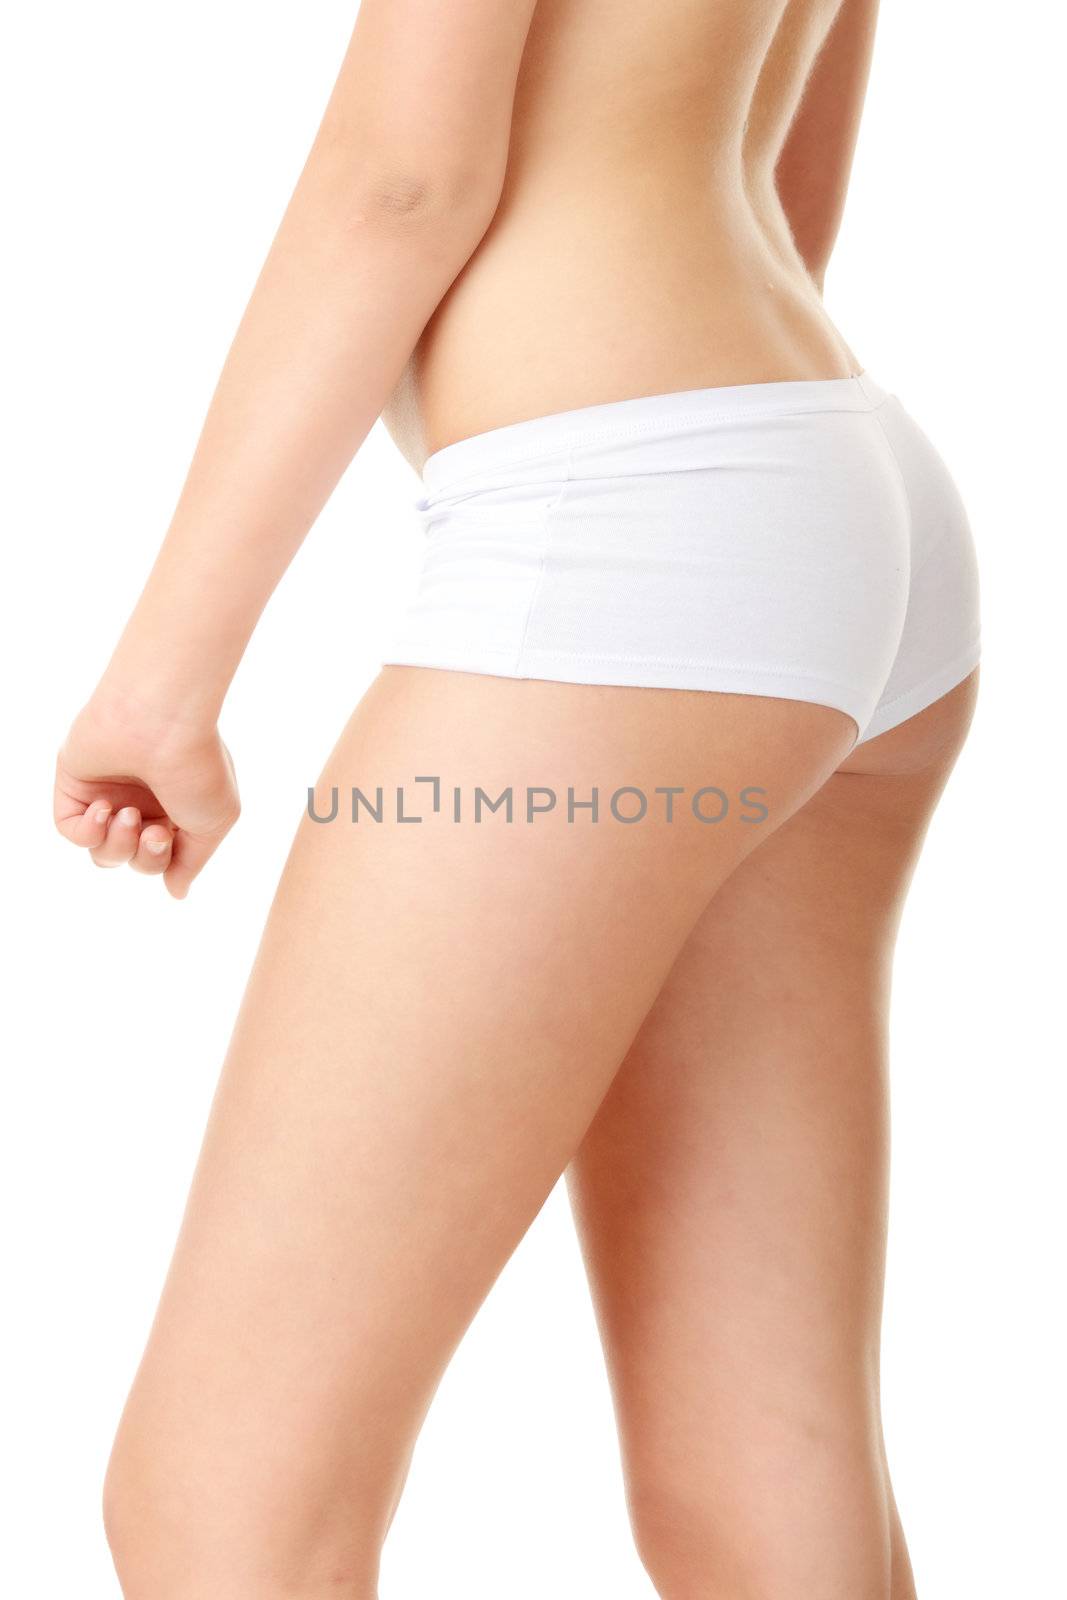 classical image of voluptuous female curves over white